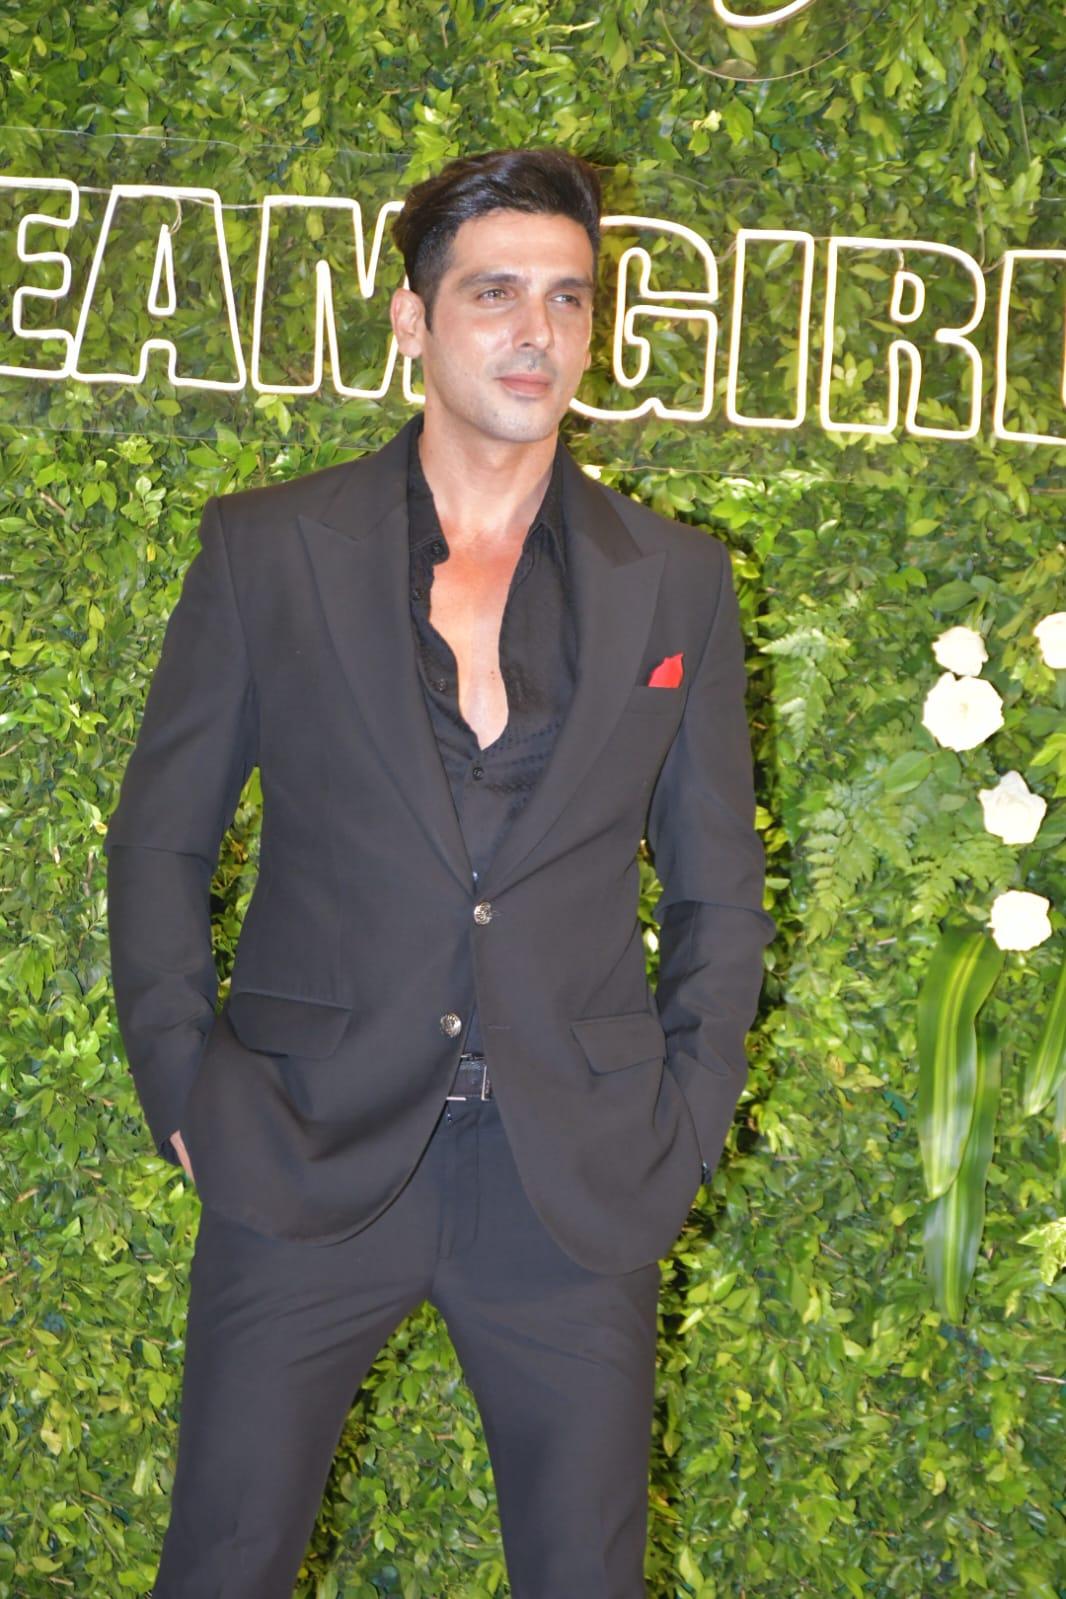 Zayed Khan arrived at the venue looking ever so gorgeous